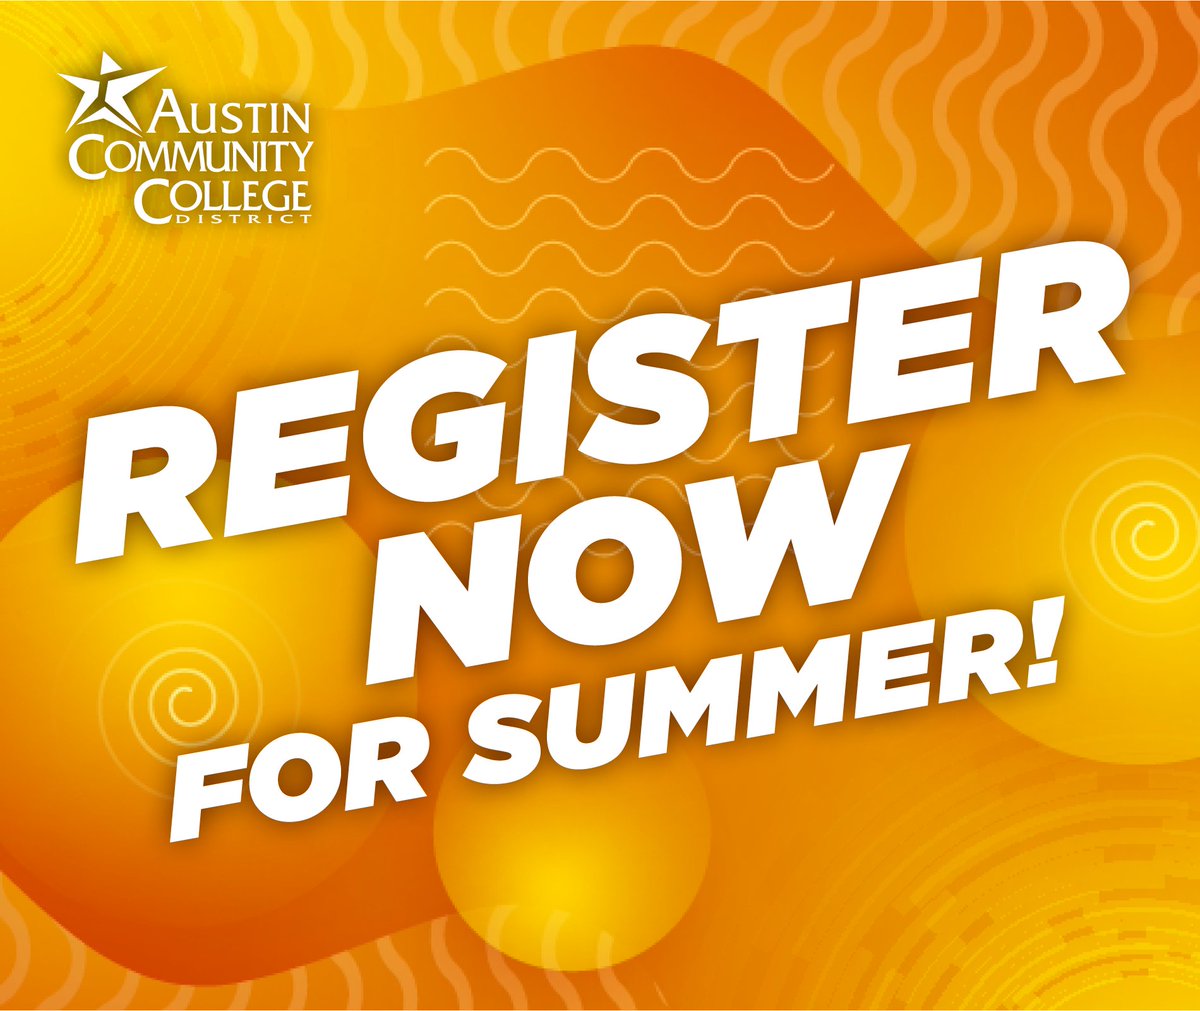 Whether you’re taking a few classes for fun or staying on track to hit your education and career goals, summer classes with ACC are here for you! 💜 Registration is open for all. Your next educational or career step is waiting for you! ➡️ austincc.edu/summer ☀️